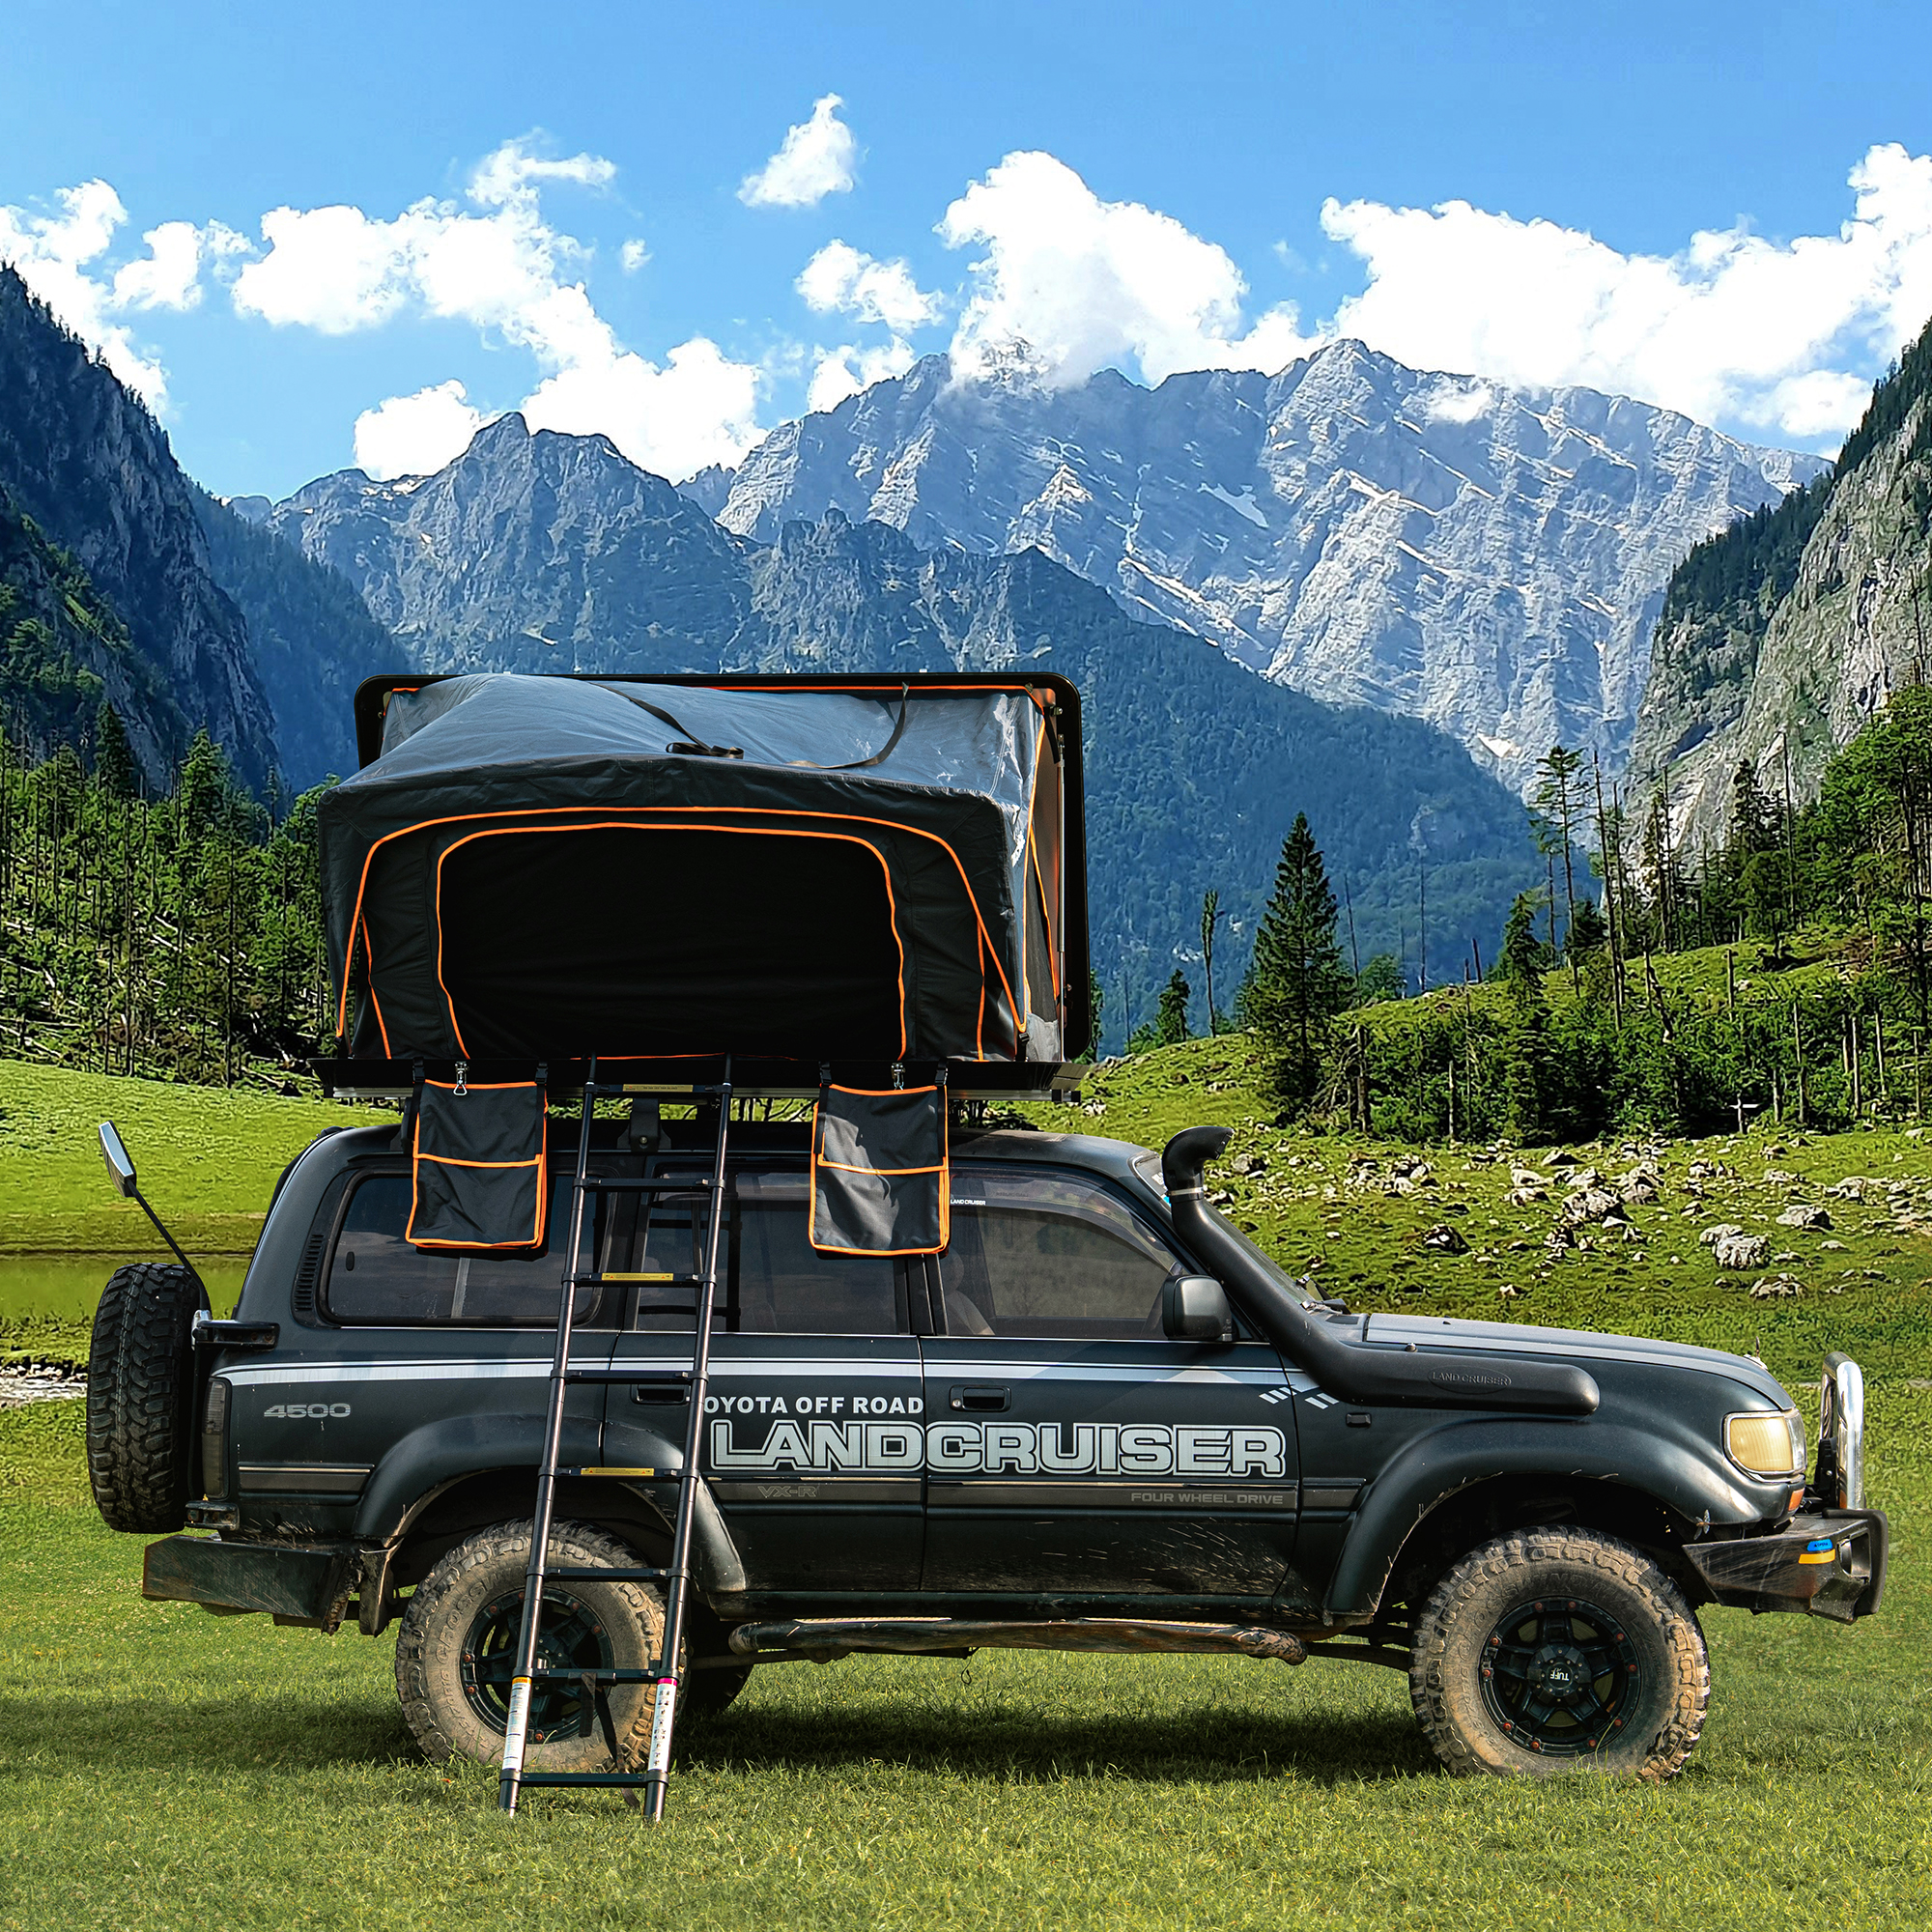 Can you put a tent on an SUV?